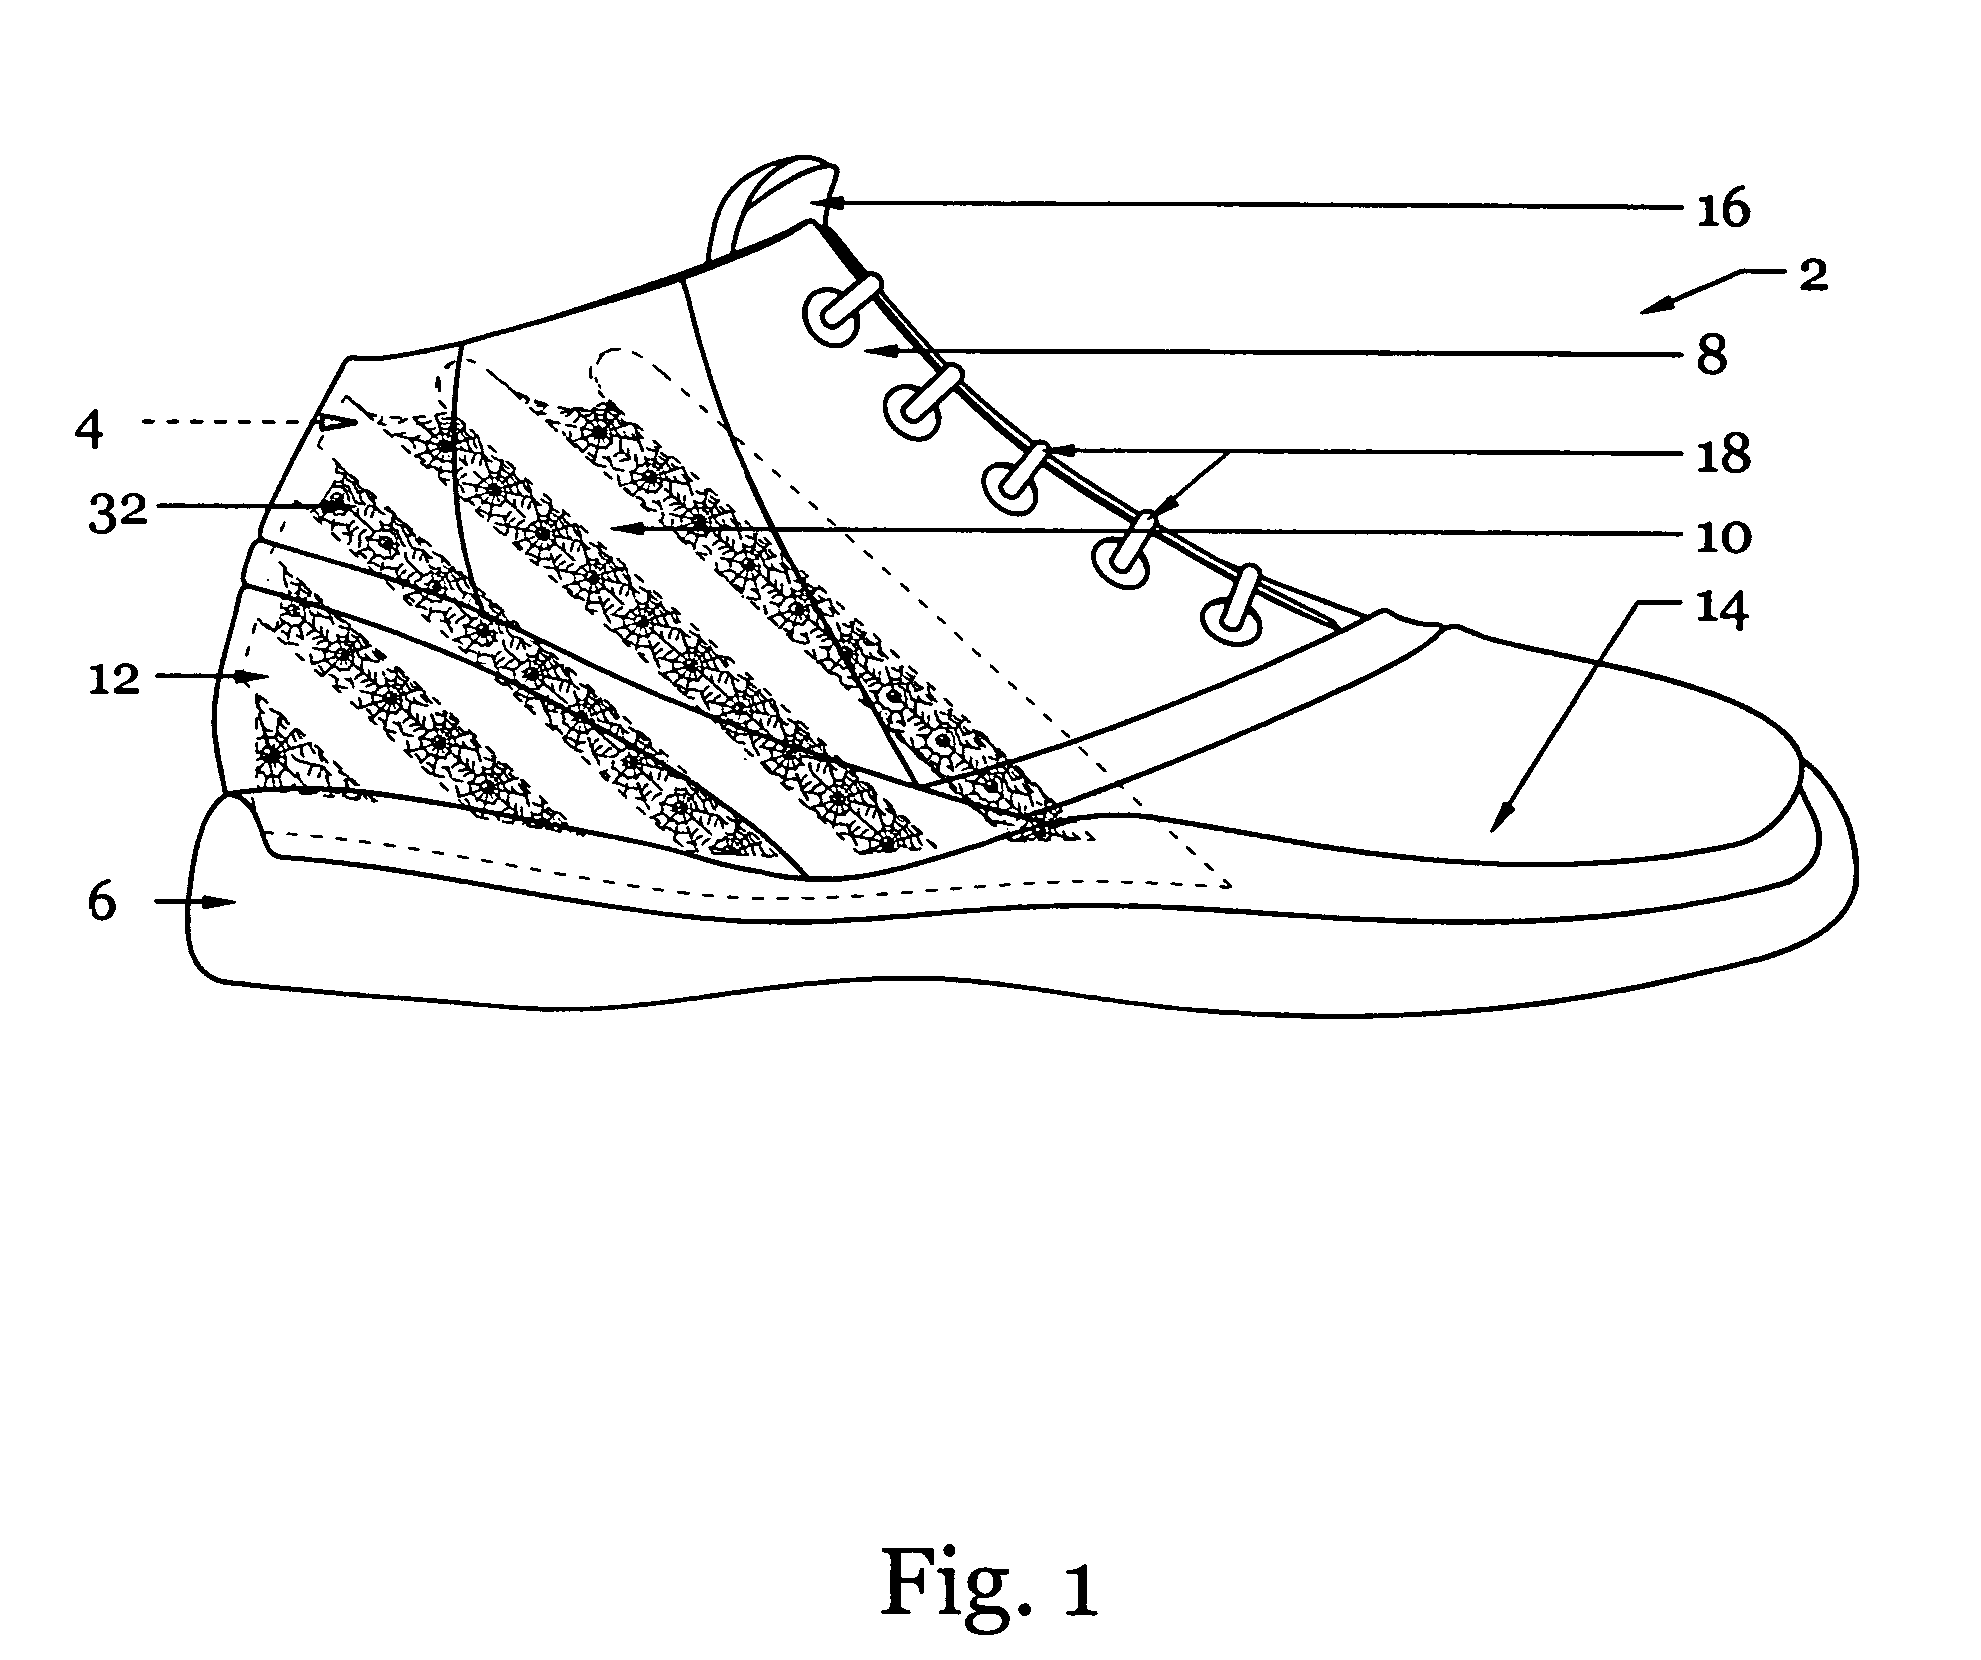 Shoe and ankle support with artificial spider web silk